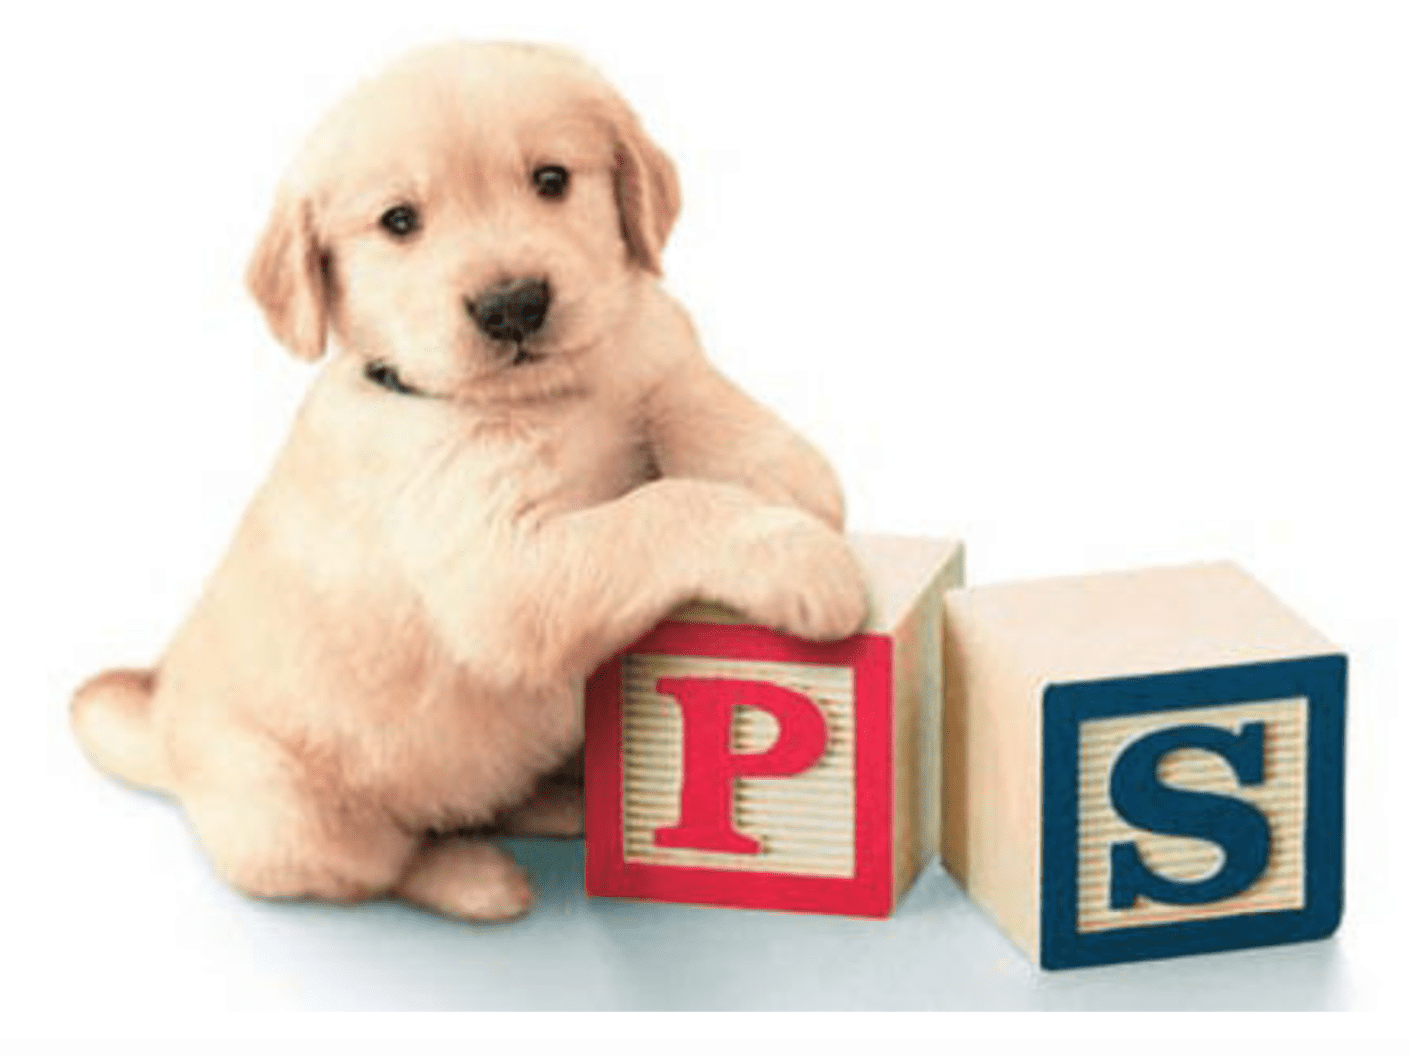 A puppy playing with letter boxes